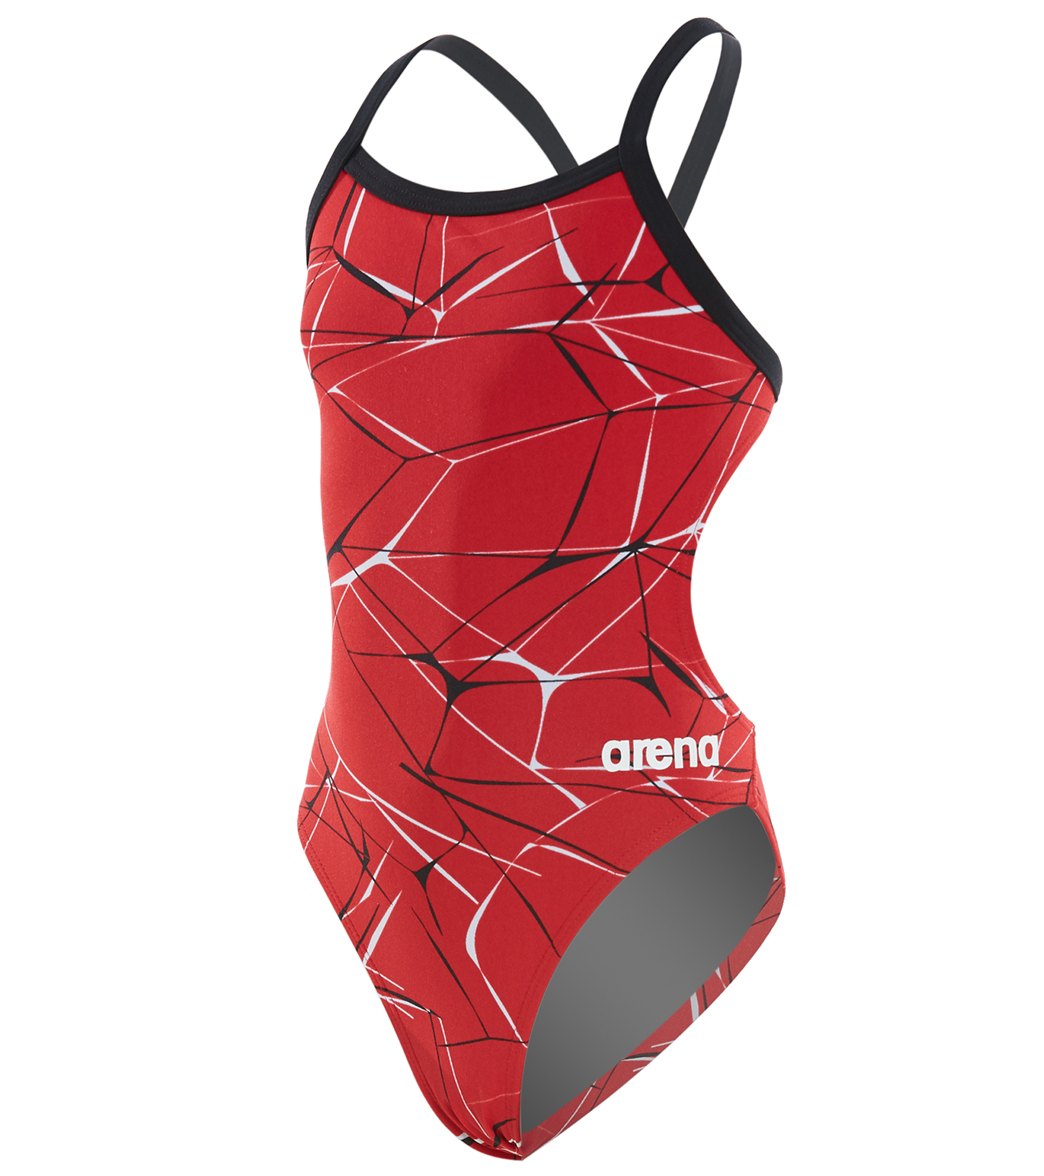 Arena Girls' Water Challenge Maxlife Thin Strap Open Back One Piece Swimsuit - Red/Black 22 Polyester/Pbt - Swimoutlet.com